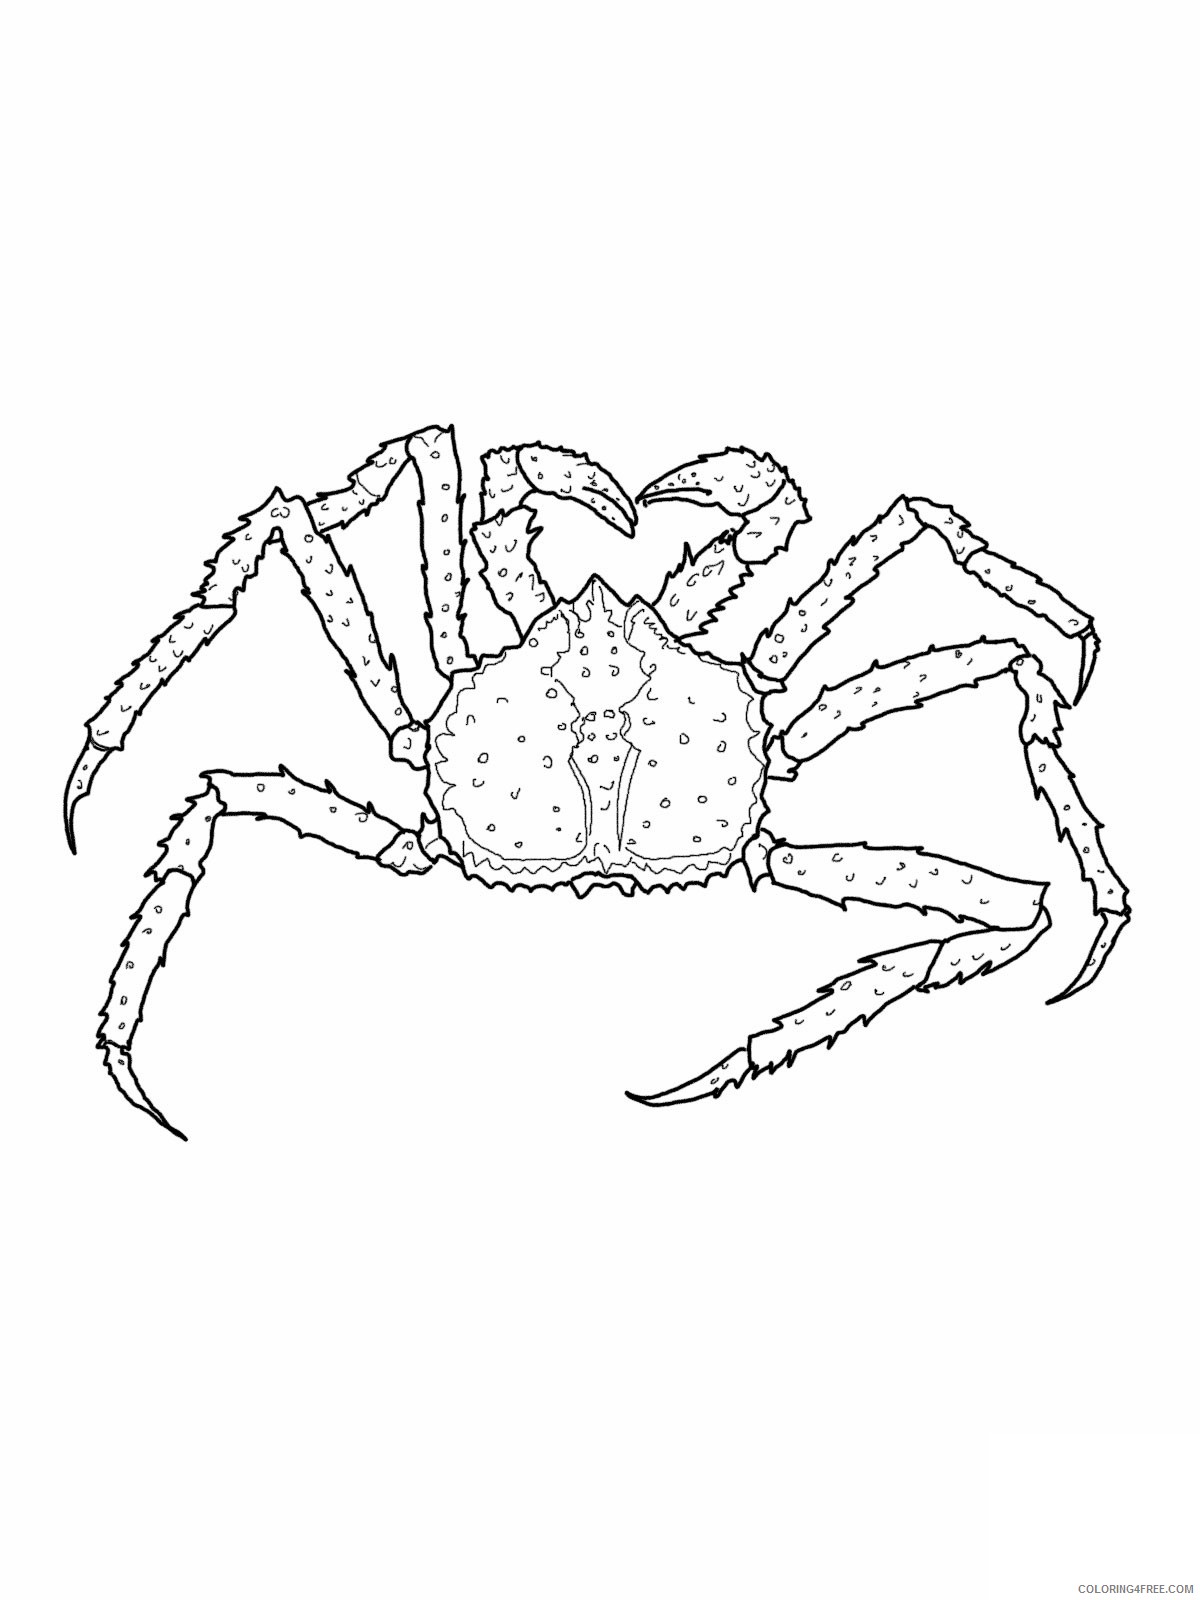 king crab coloring pages printable Coloring4free